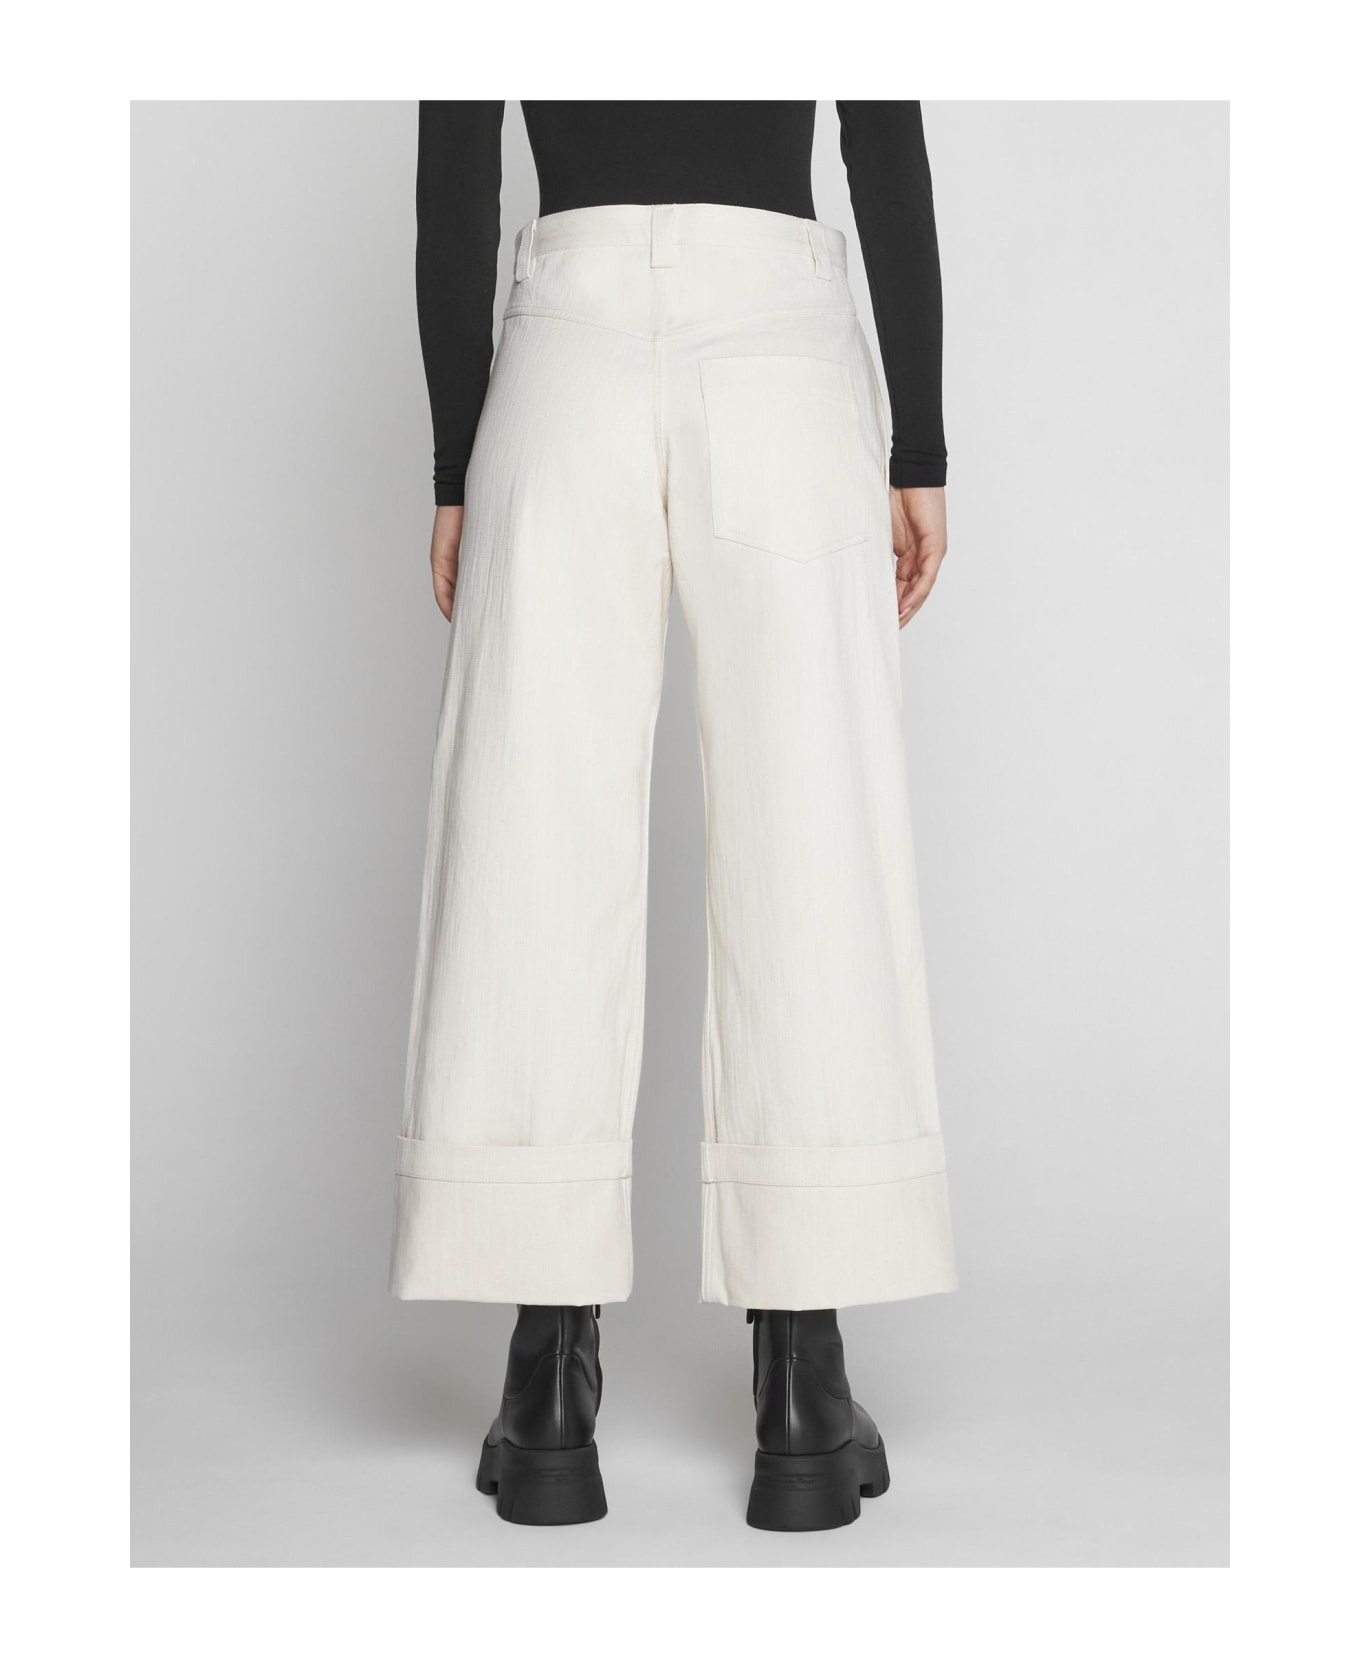 Moncler Genius Flared Cropped Jeans - WHITE